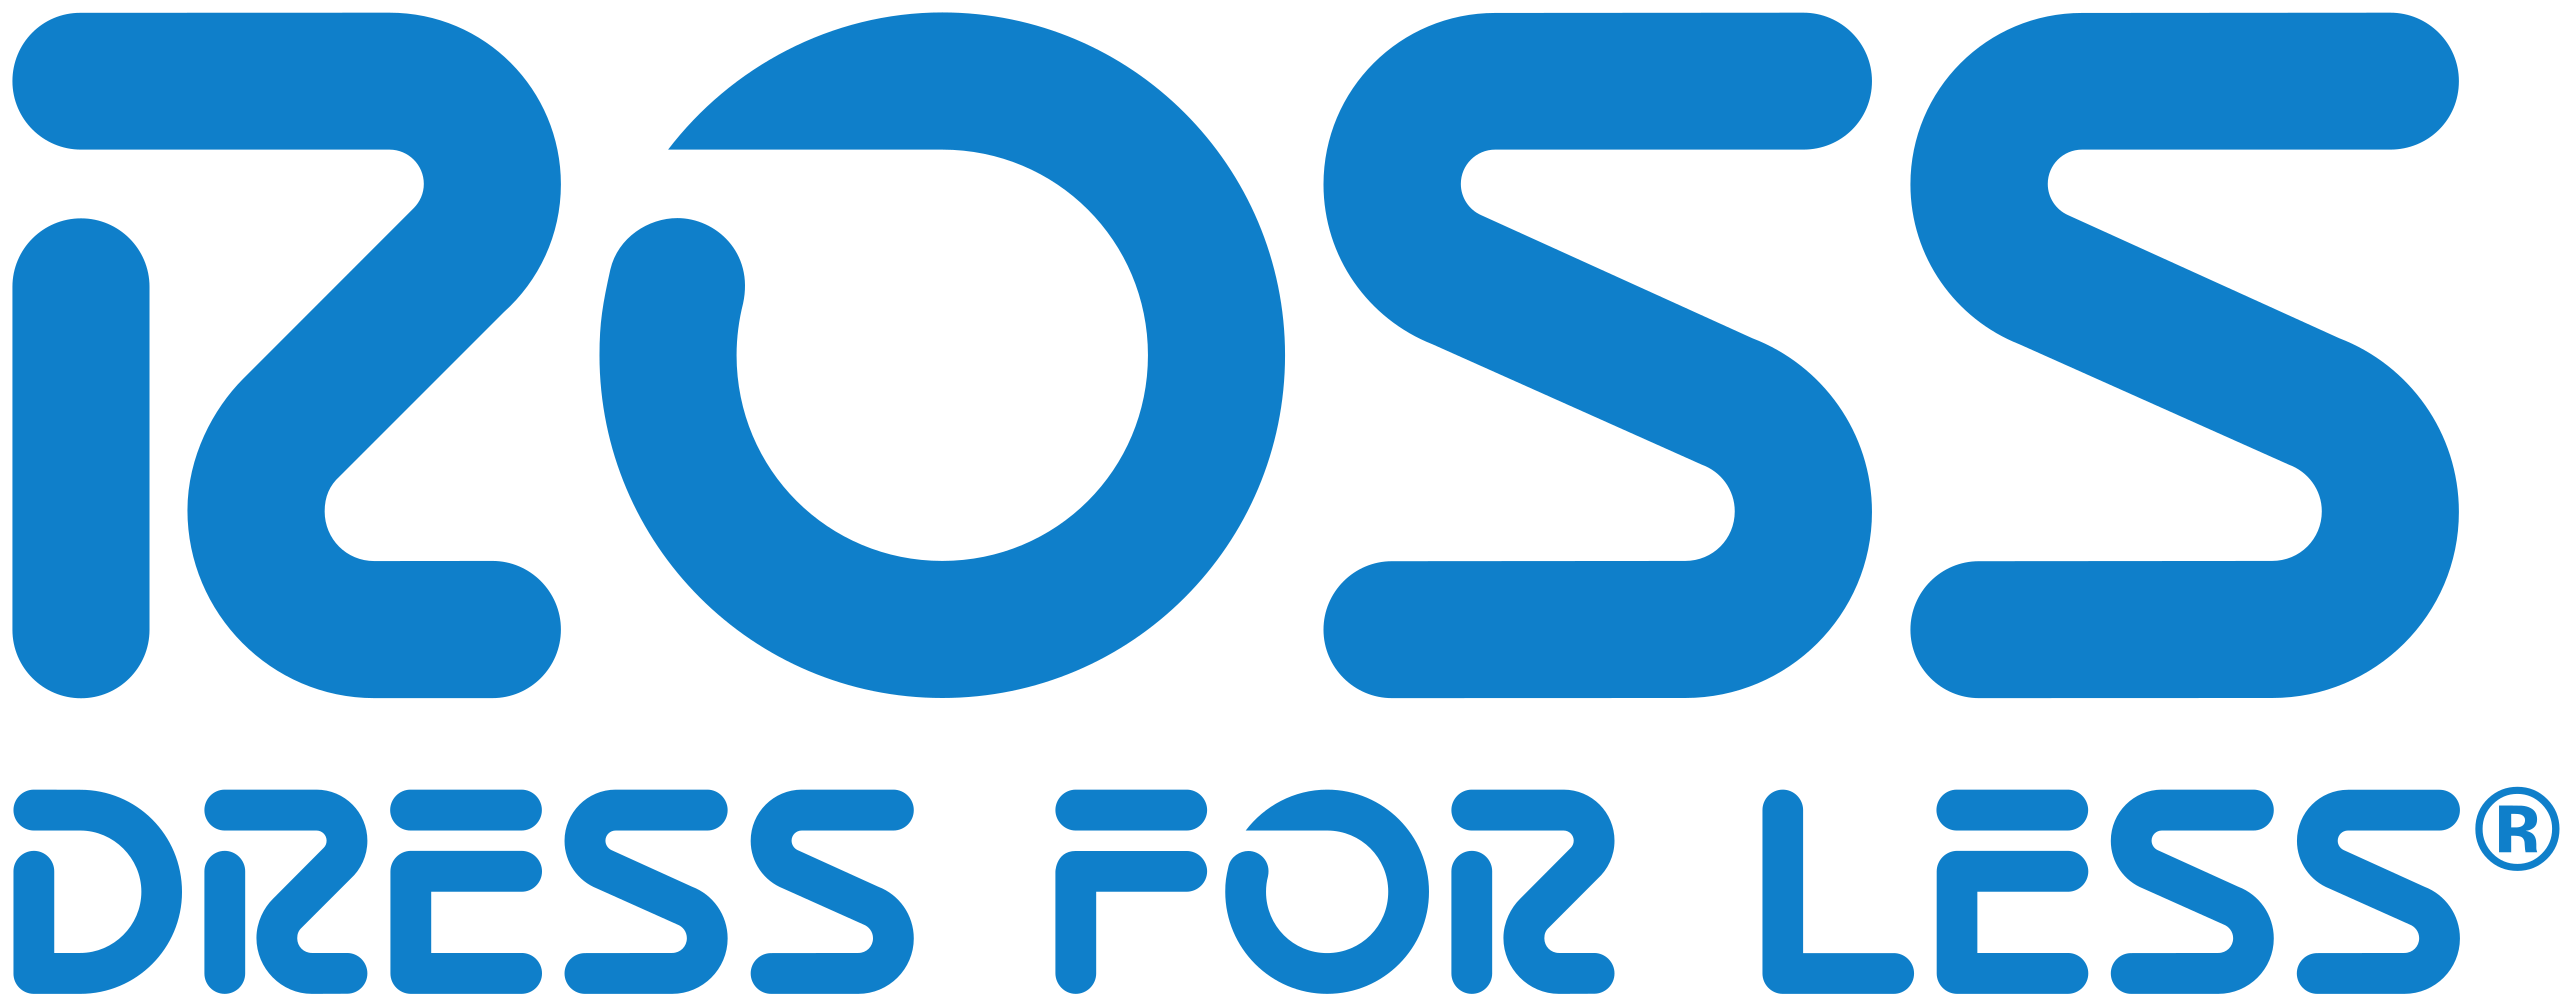 2560px-Ross_Stores_logo.svg.png